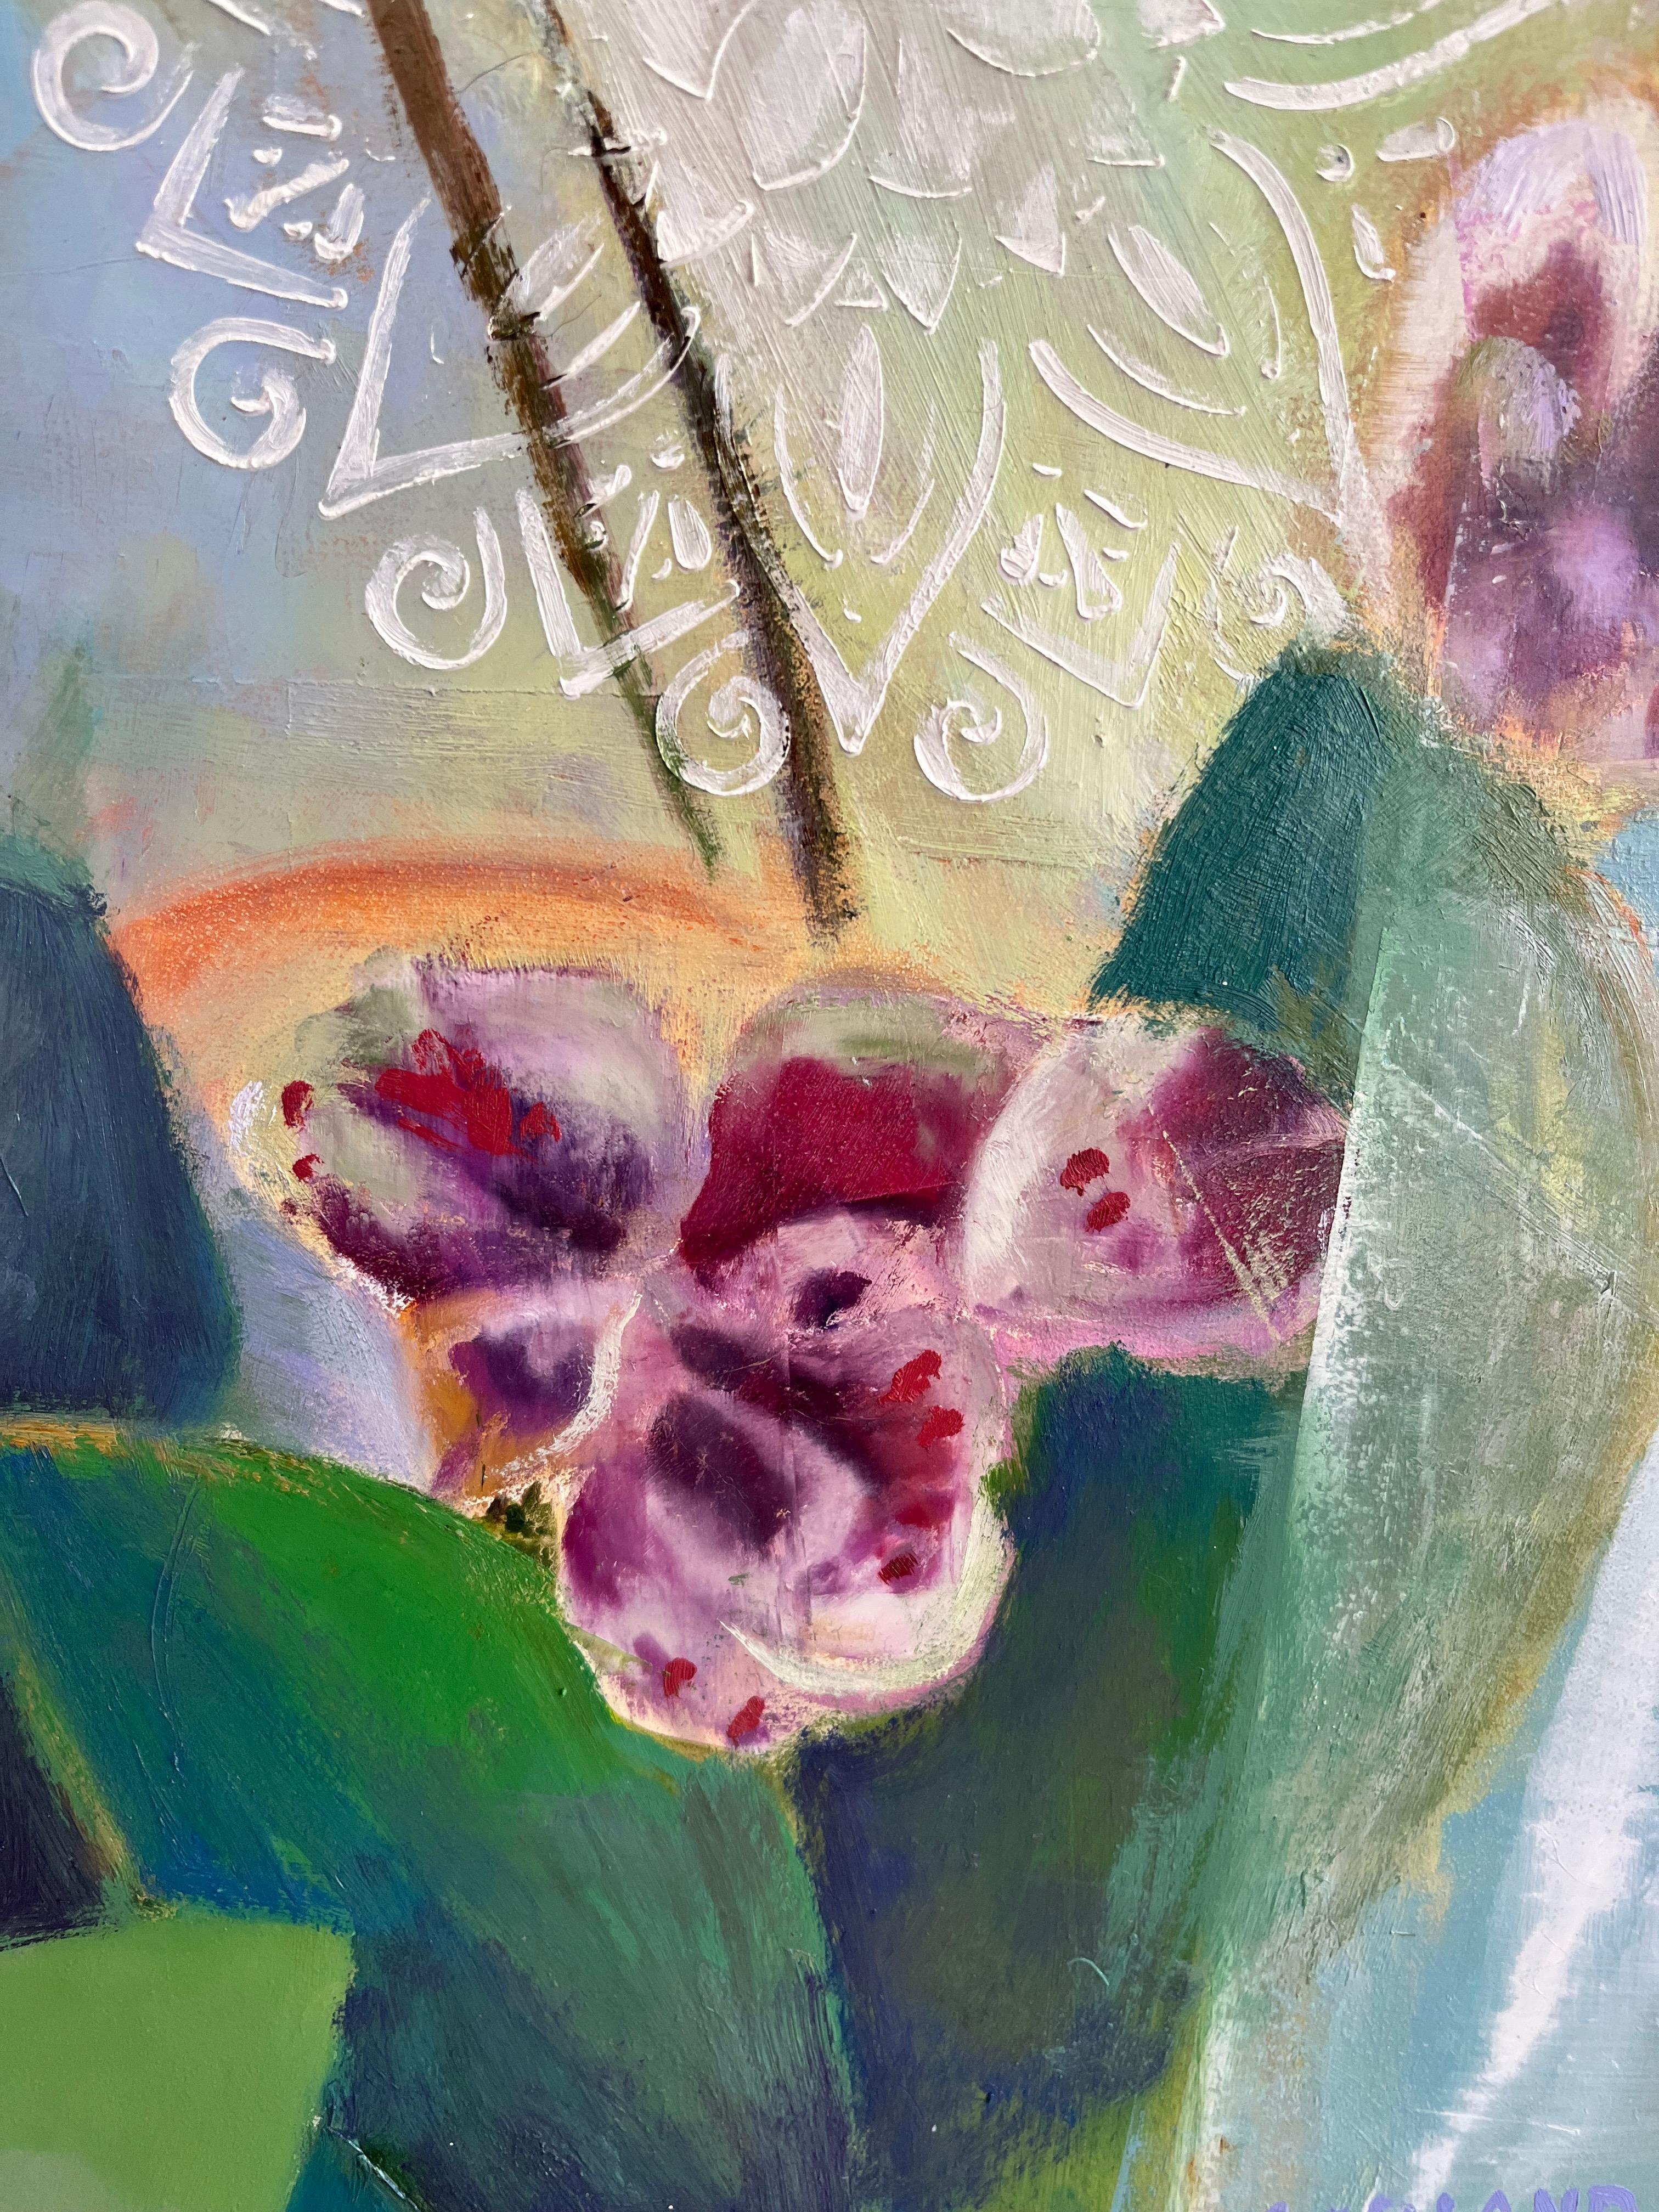 Descriptive text: Cellophane wrapped orchids caught the eye of artist Carole Garland, and she chose to paint the peekaboo flowers in this abstracted oil painting. This is a new subject for the artist, who has painted landscapes, cityscapes and